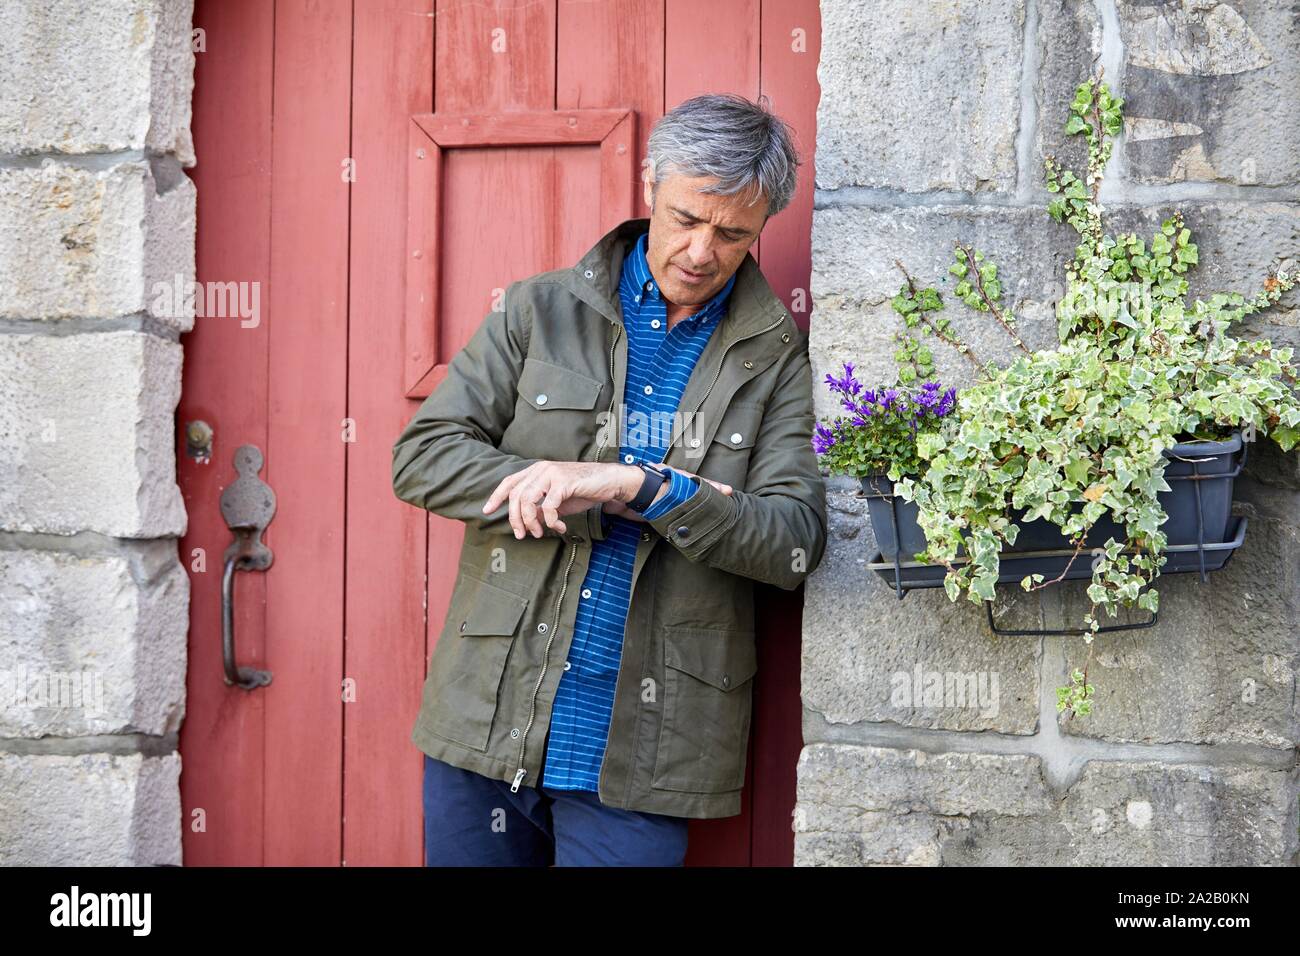 Mature man looking at his watch, waiting. Rue Pocalette, Basque Architecture, Ciboure, Aquitaine, Basque Country, France Stock Photo